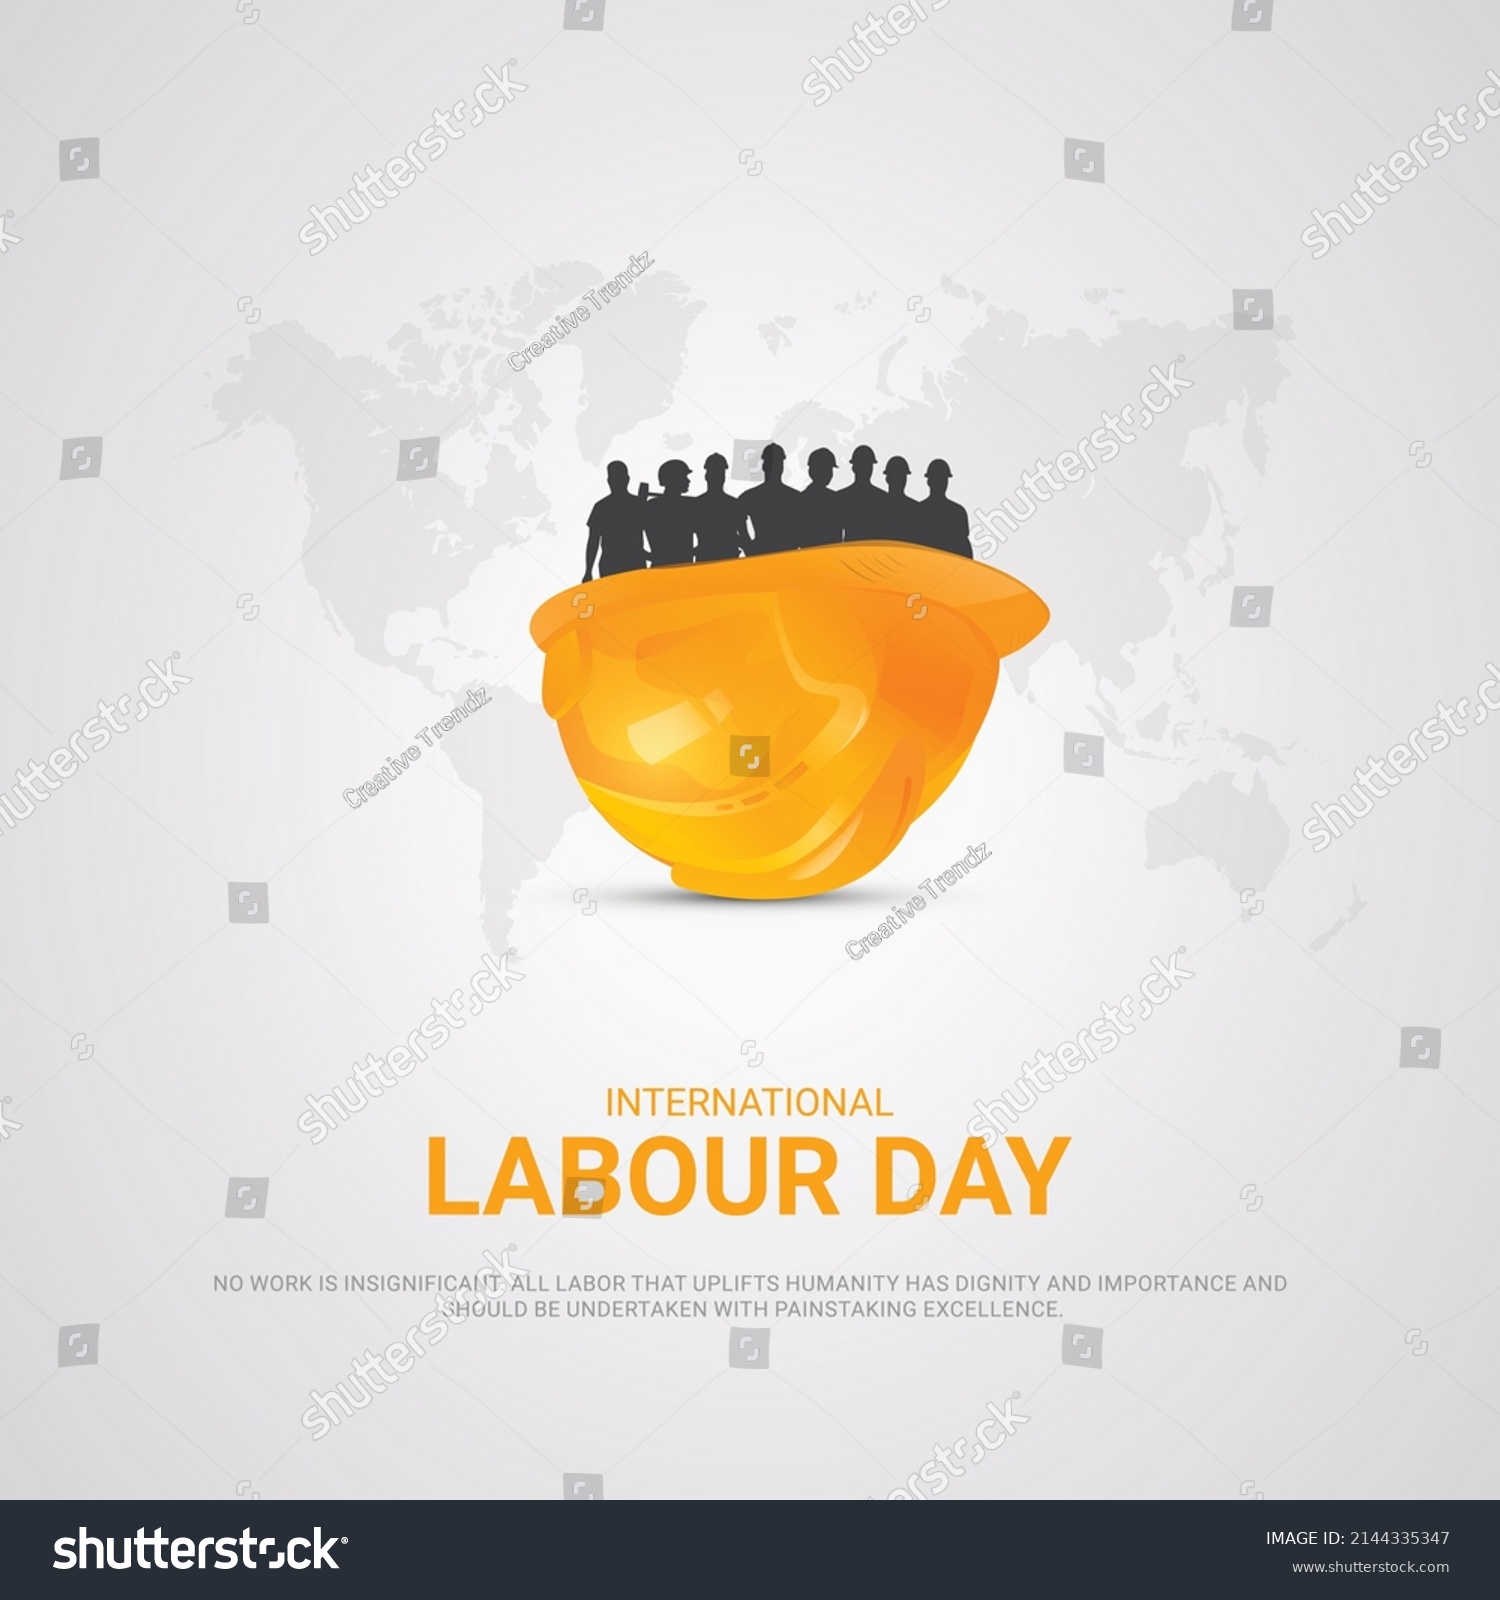 International Labor Day. Labour day. May 1st. 3D illustration  #2144335347